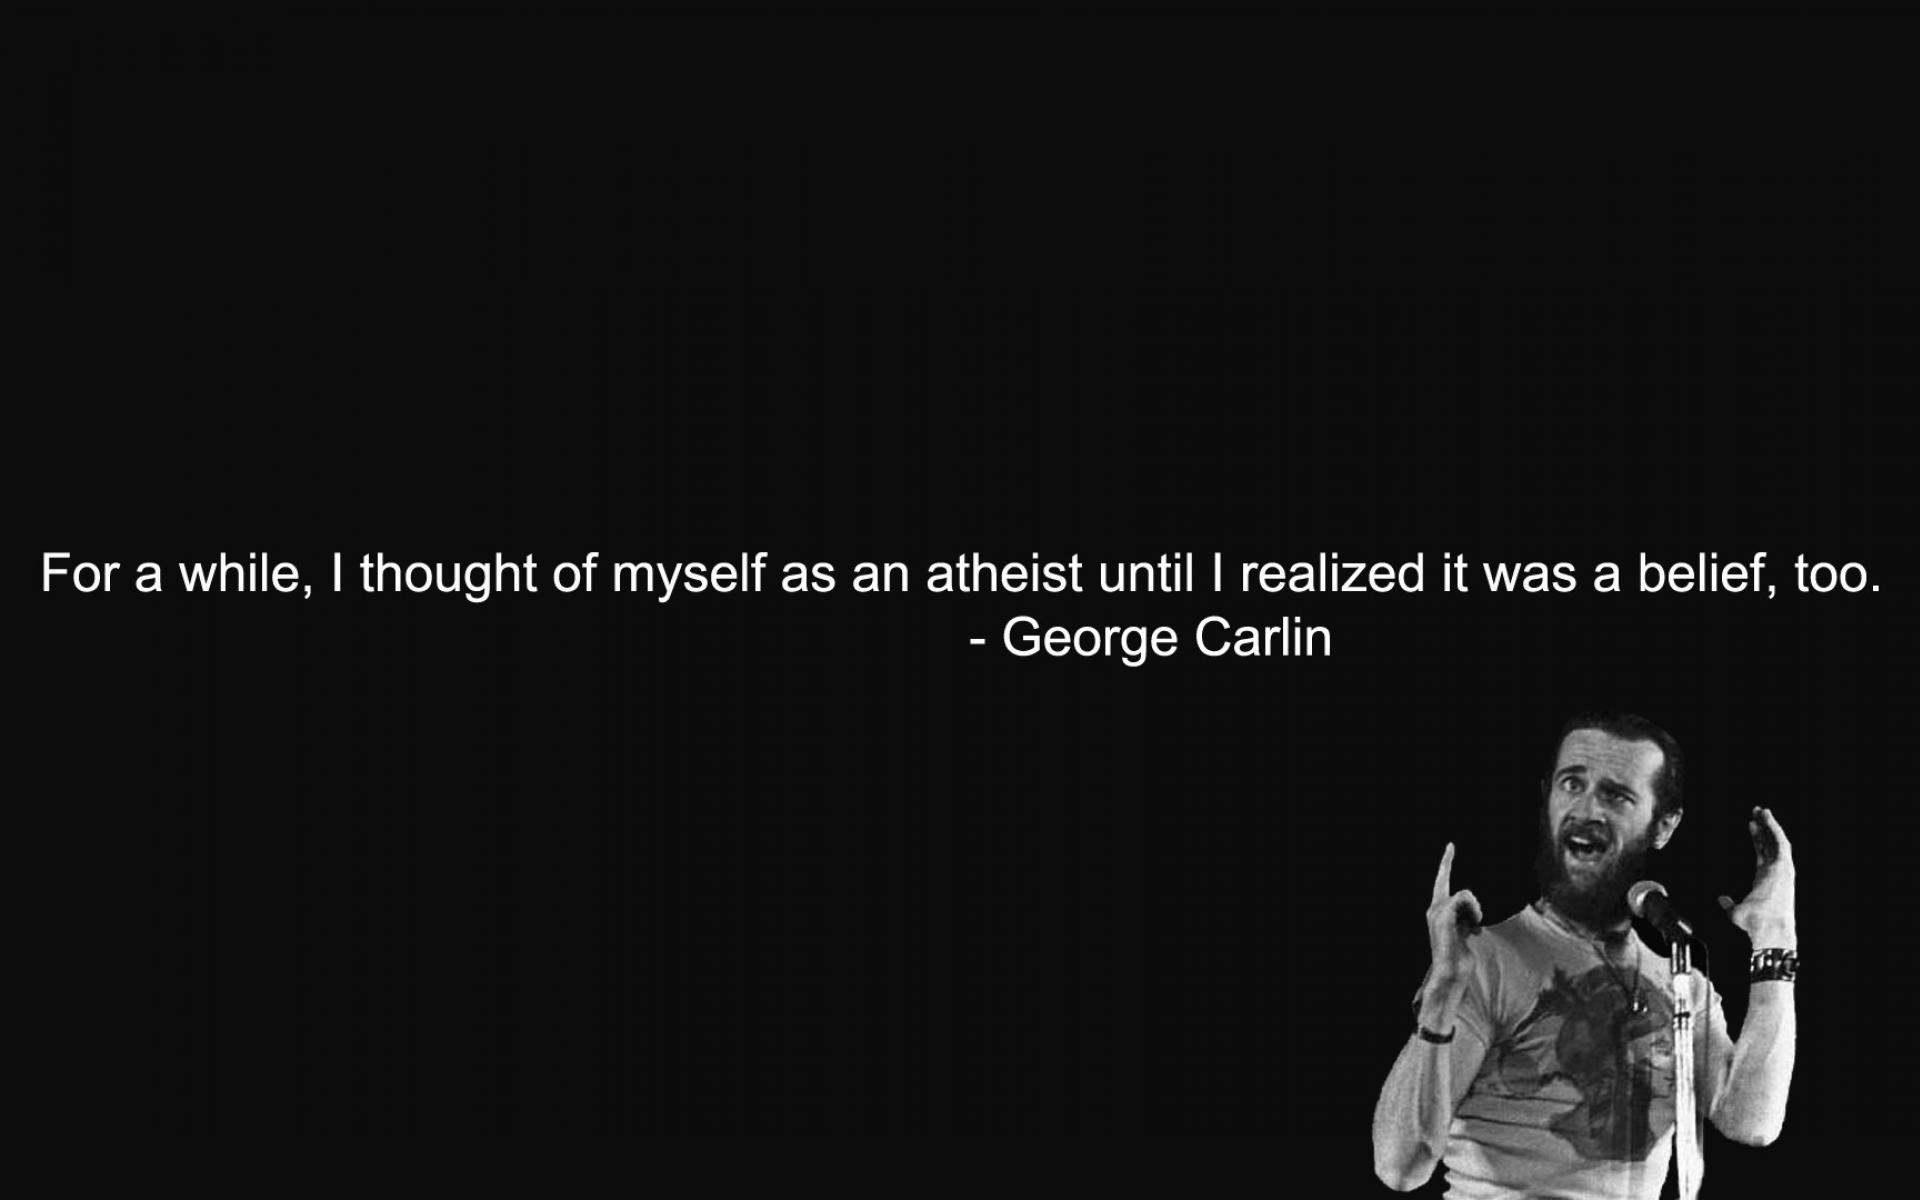 Text quotes men atheism george carlin wallpaper | (70750)